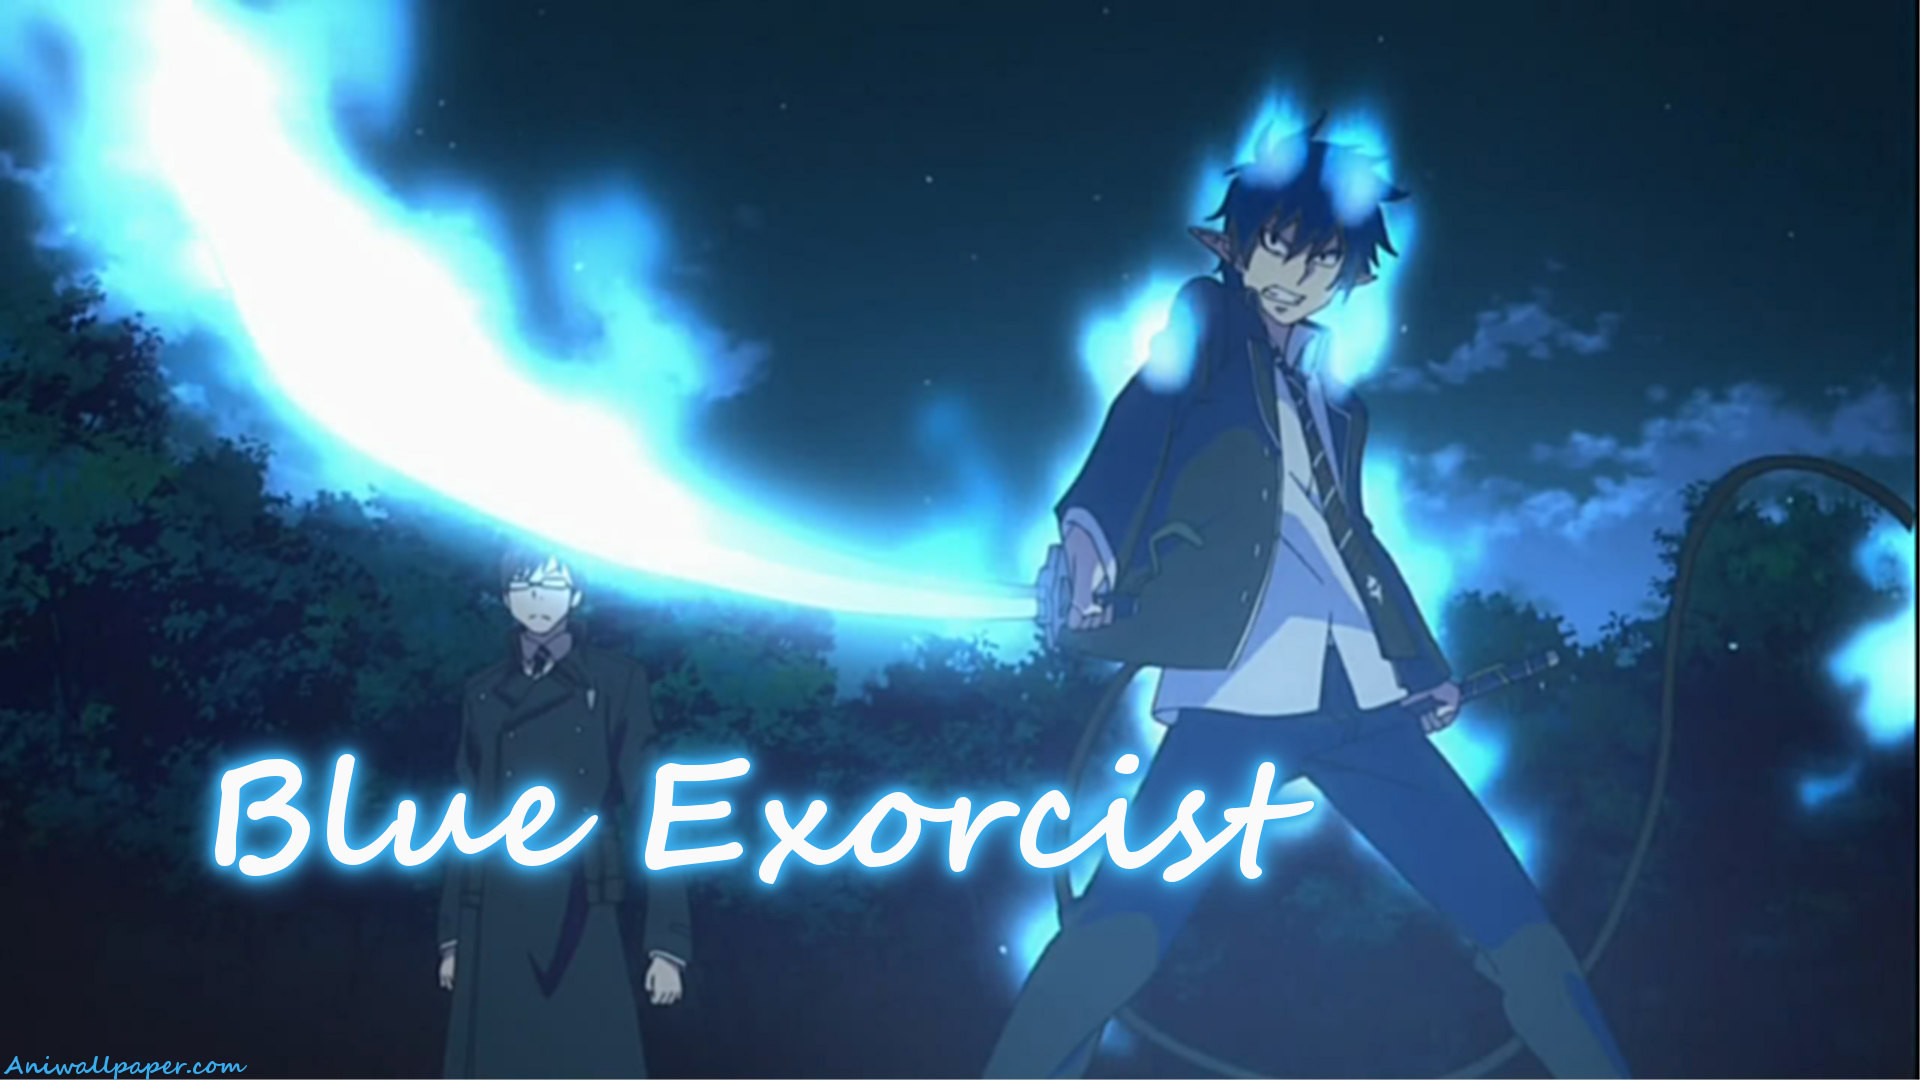 1920x1080 Raraboom images Blue Exorcist HD wallpaper and background photos